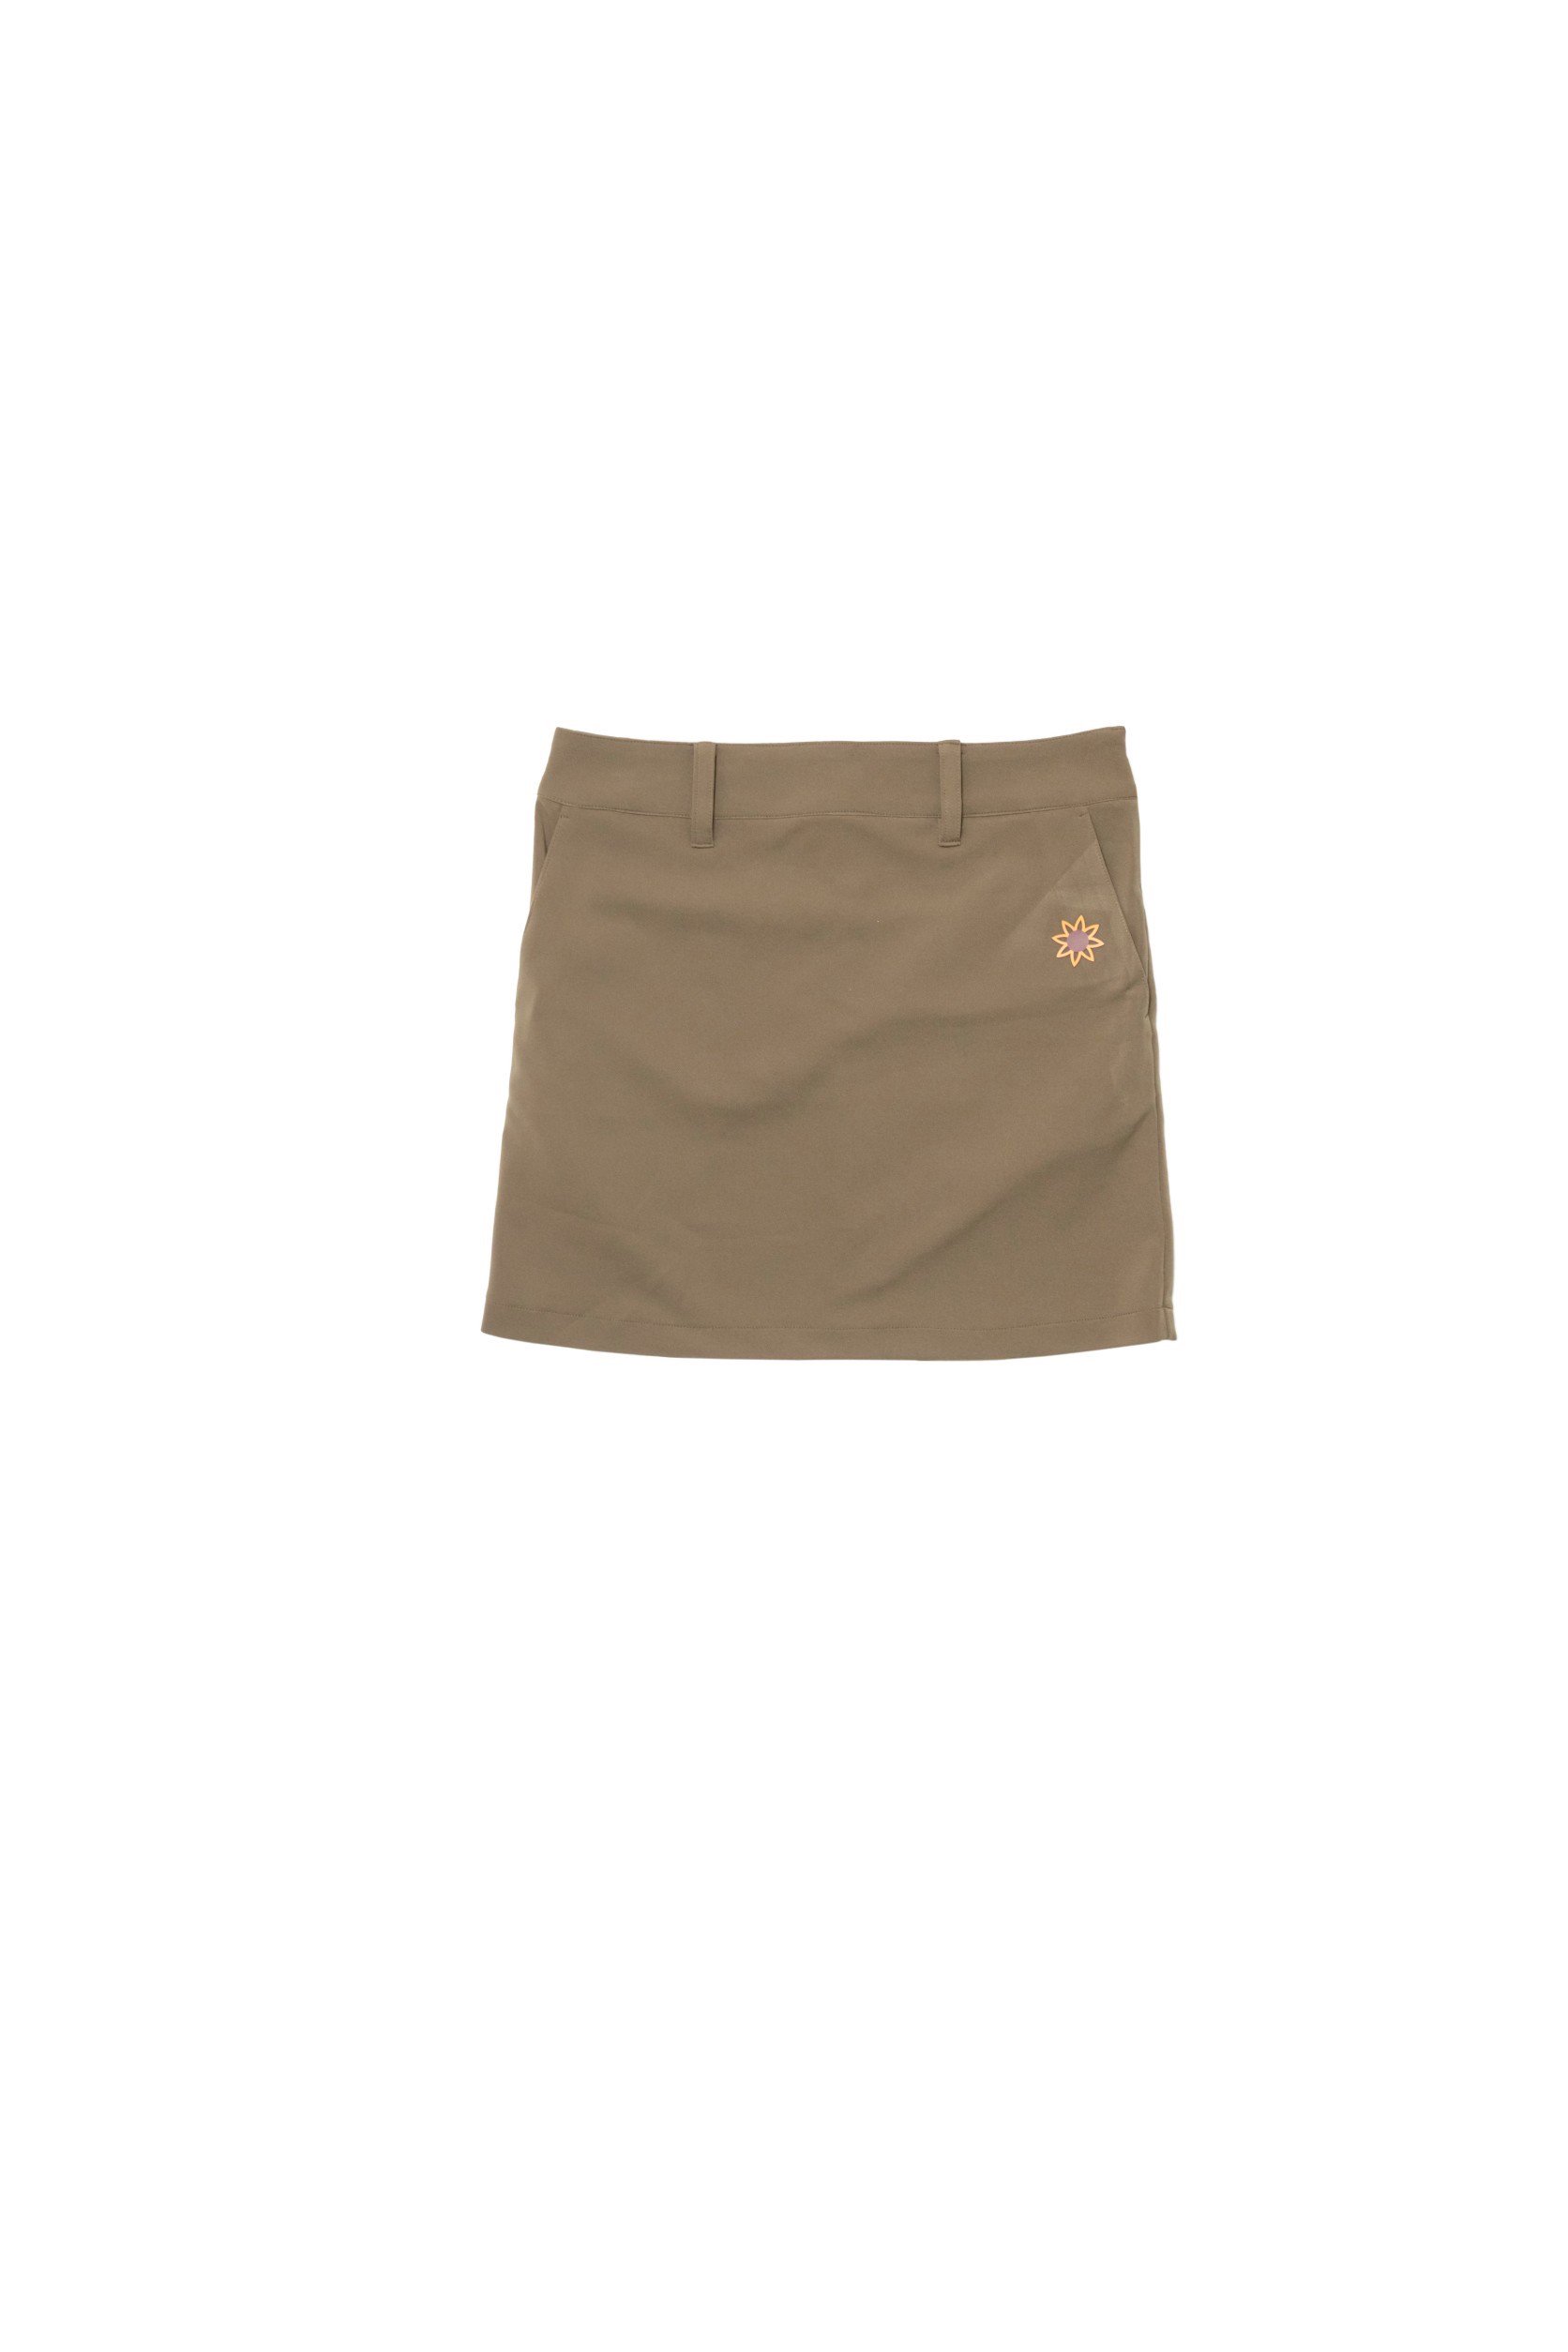 <img class='new_mark_img1' src='https://img.shop-pro.jp/img/new/icons50.gif' style='border:none;display:inline;margin:0px;padding:0px;width:auto;' />SIDE ZIP SKIRT<br />khaki